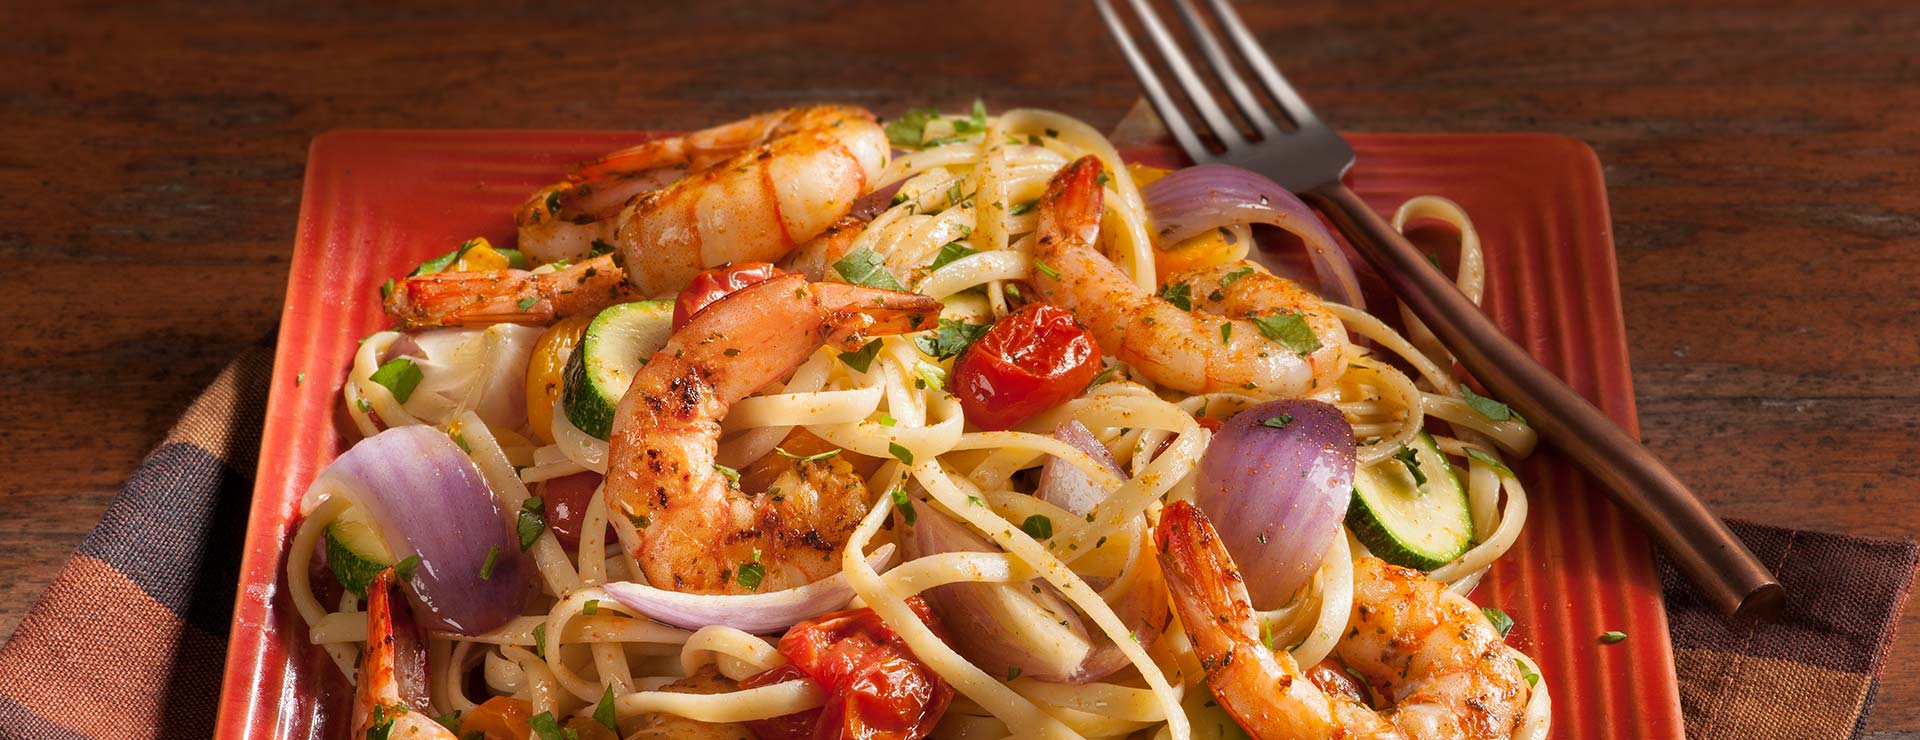 Cajun Shrimp and Pasta with Vegetables